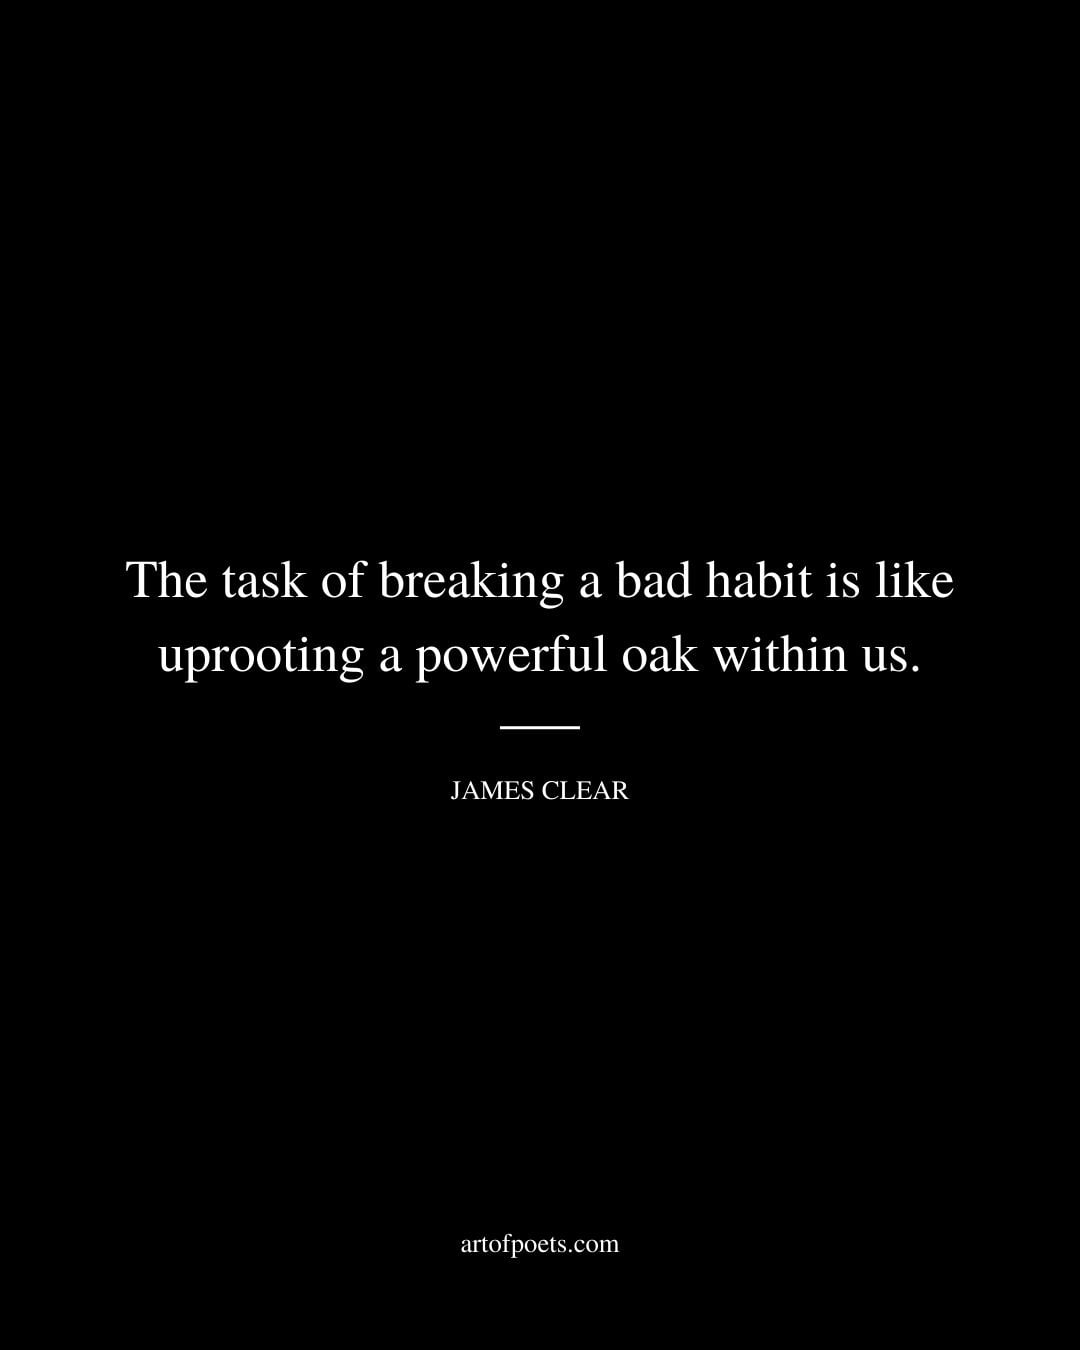 The task of breaking a bad habit is like uprooting a powerful oak within us